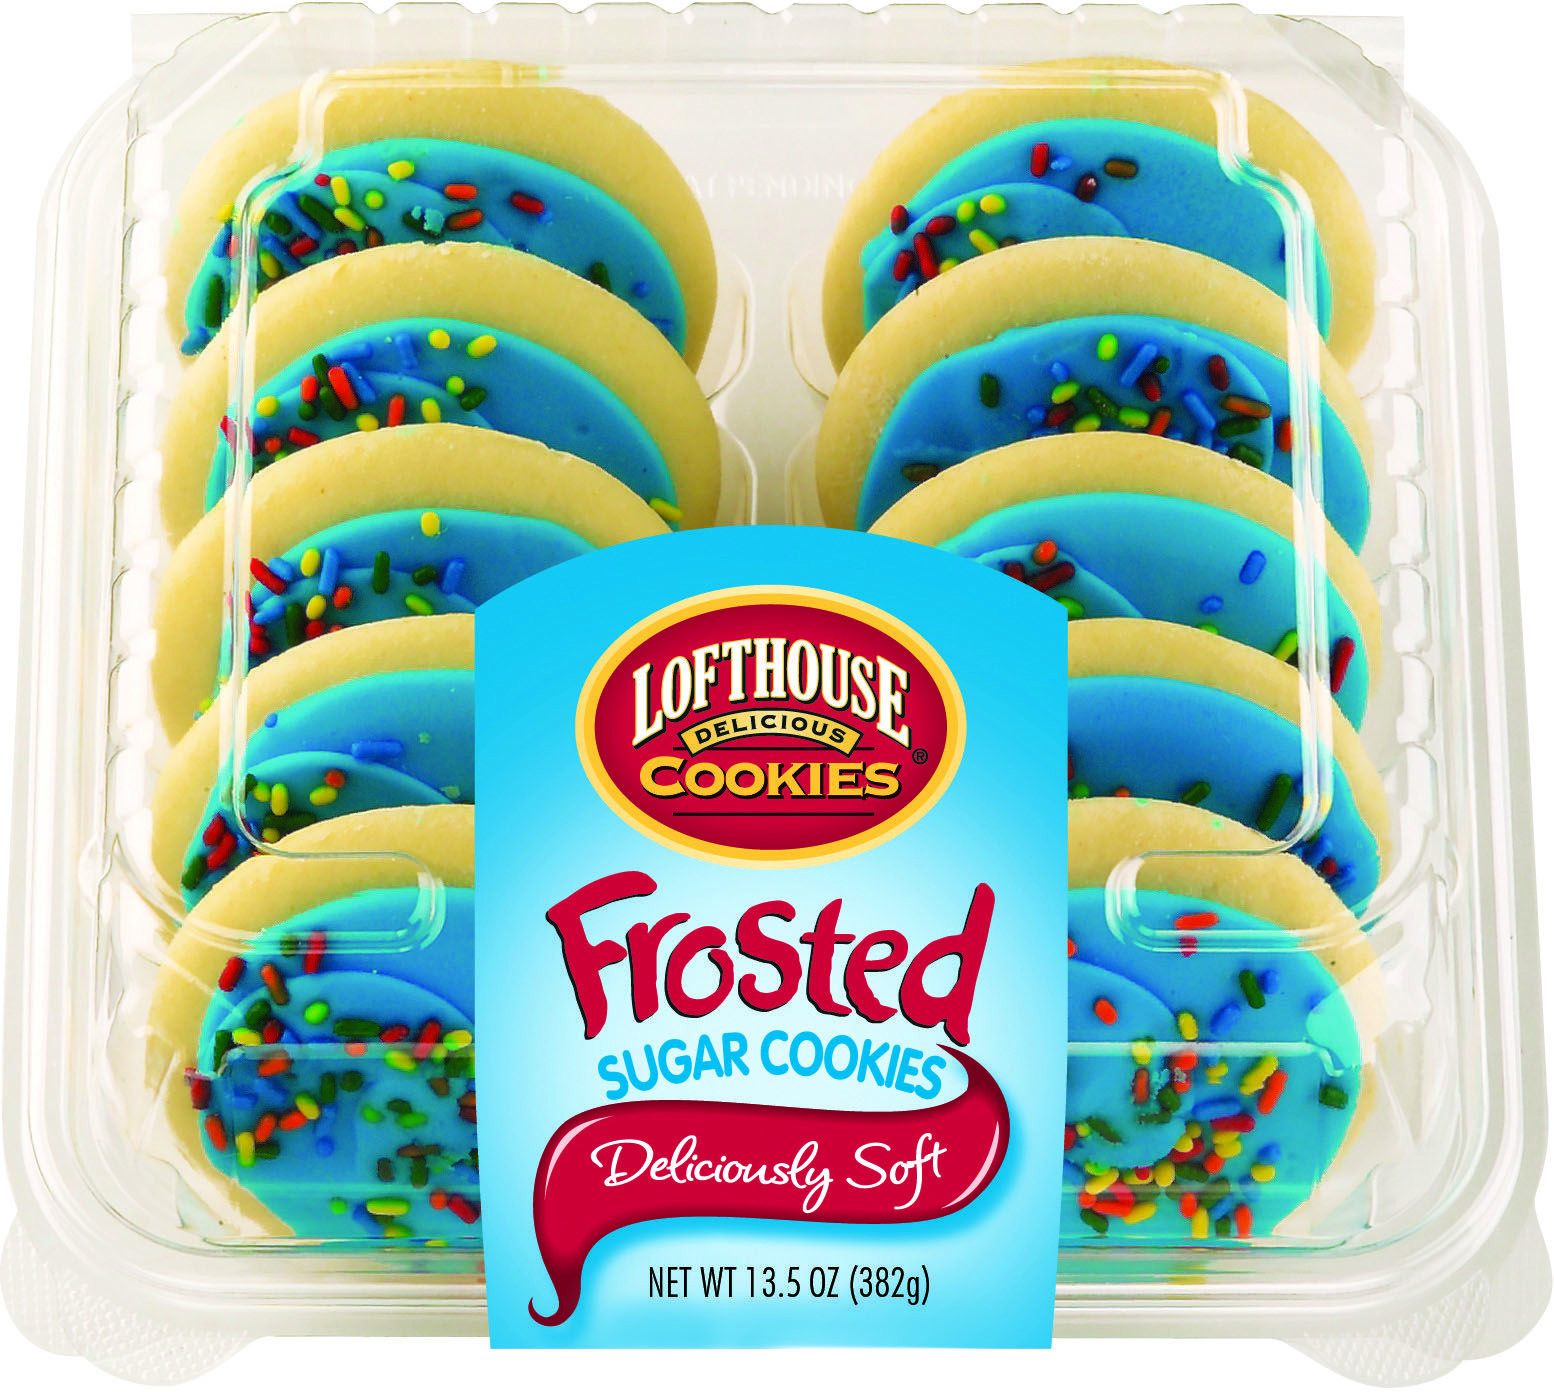 Christmas Sugar Cookies Walmart
 Lofthouse Blue Frosted Sugar Cookies Ya know for a